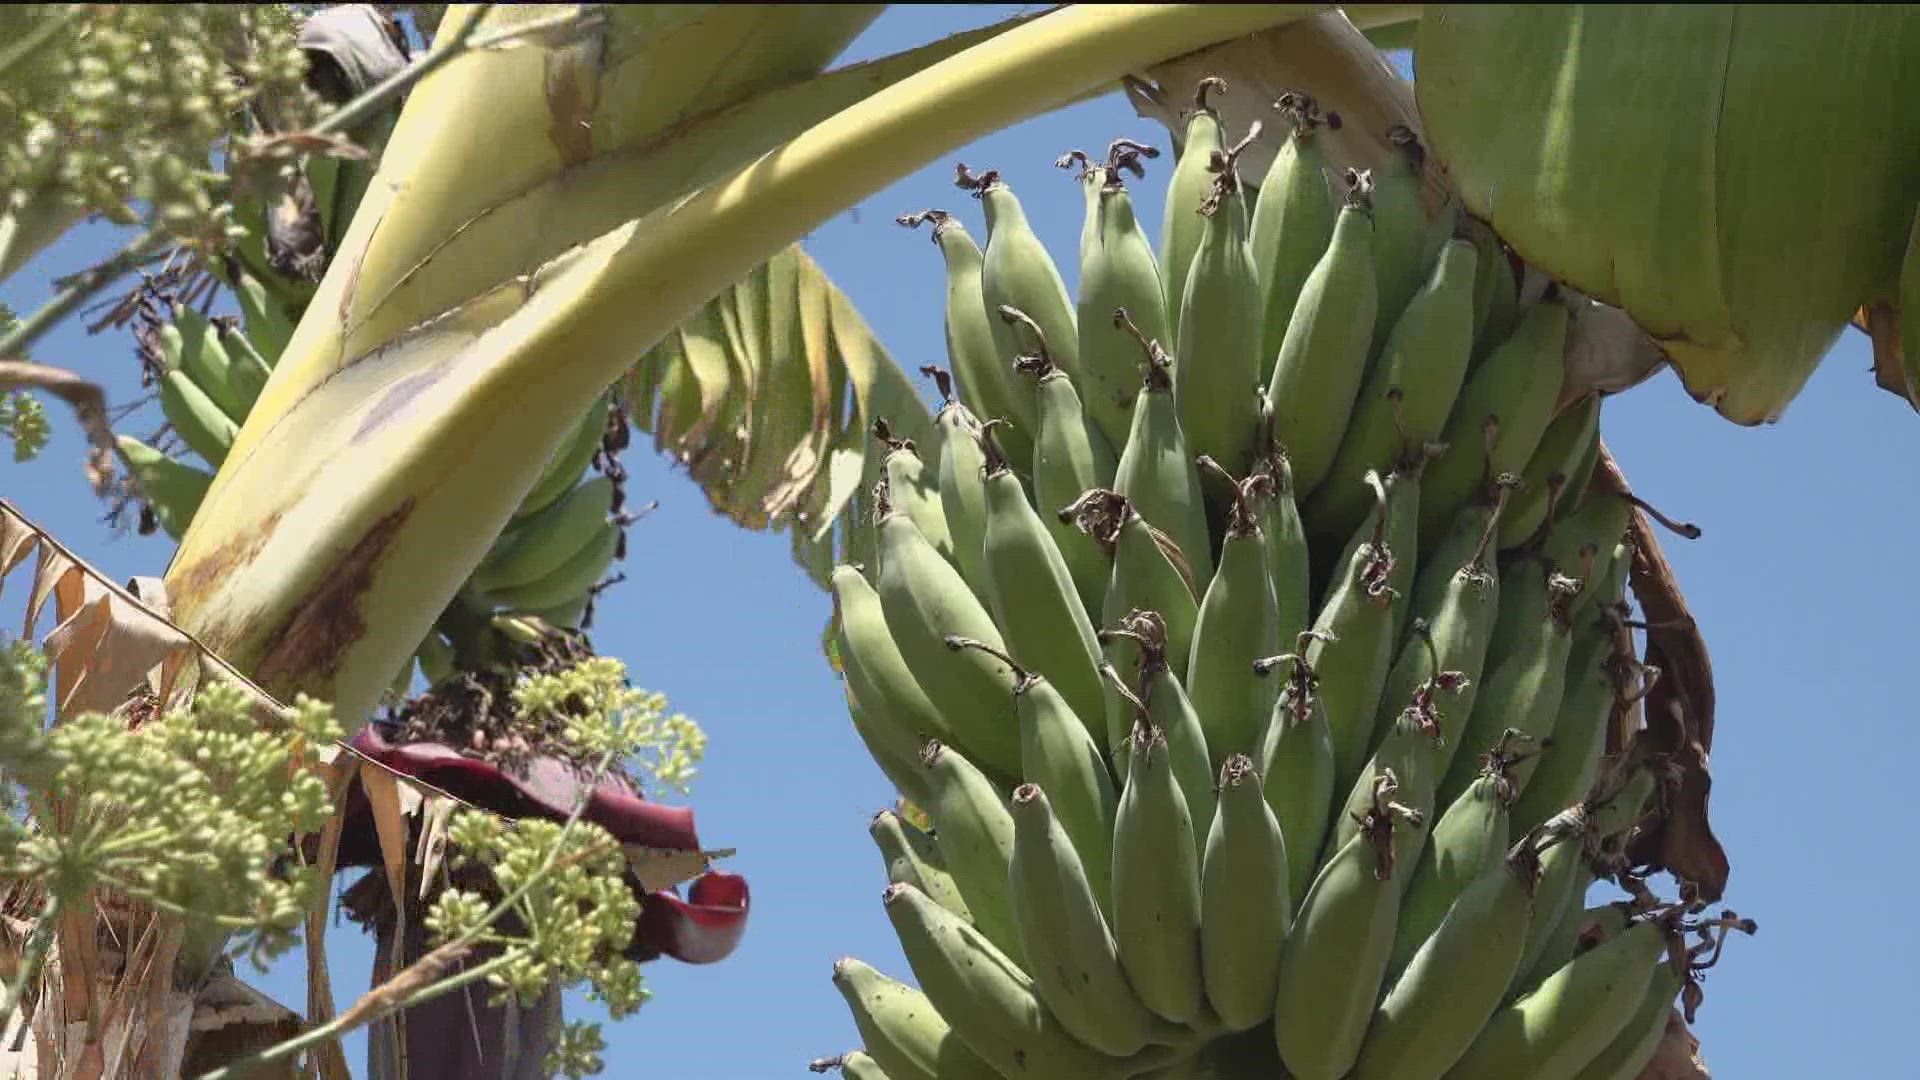 Anyone can be a part of this garden, which runs the gamut of what can be grown in a garden, including tropical bananas!